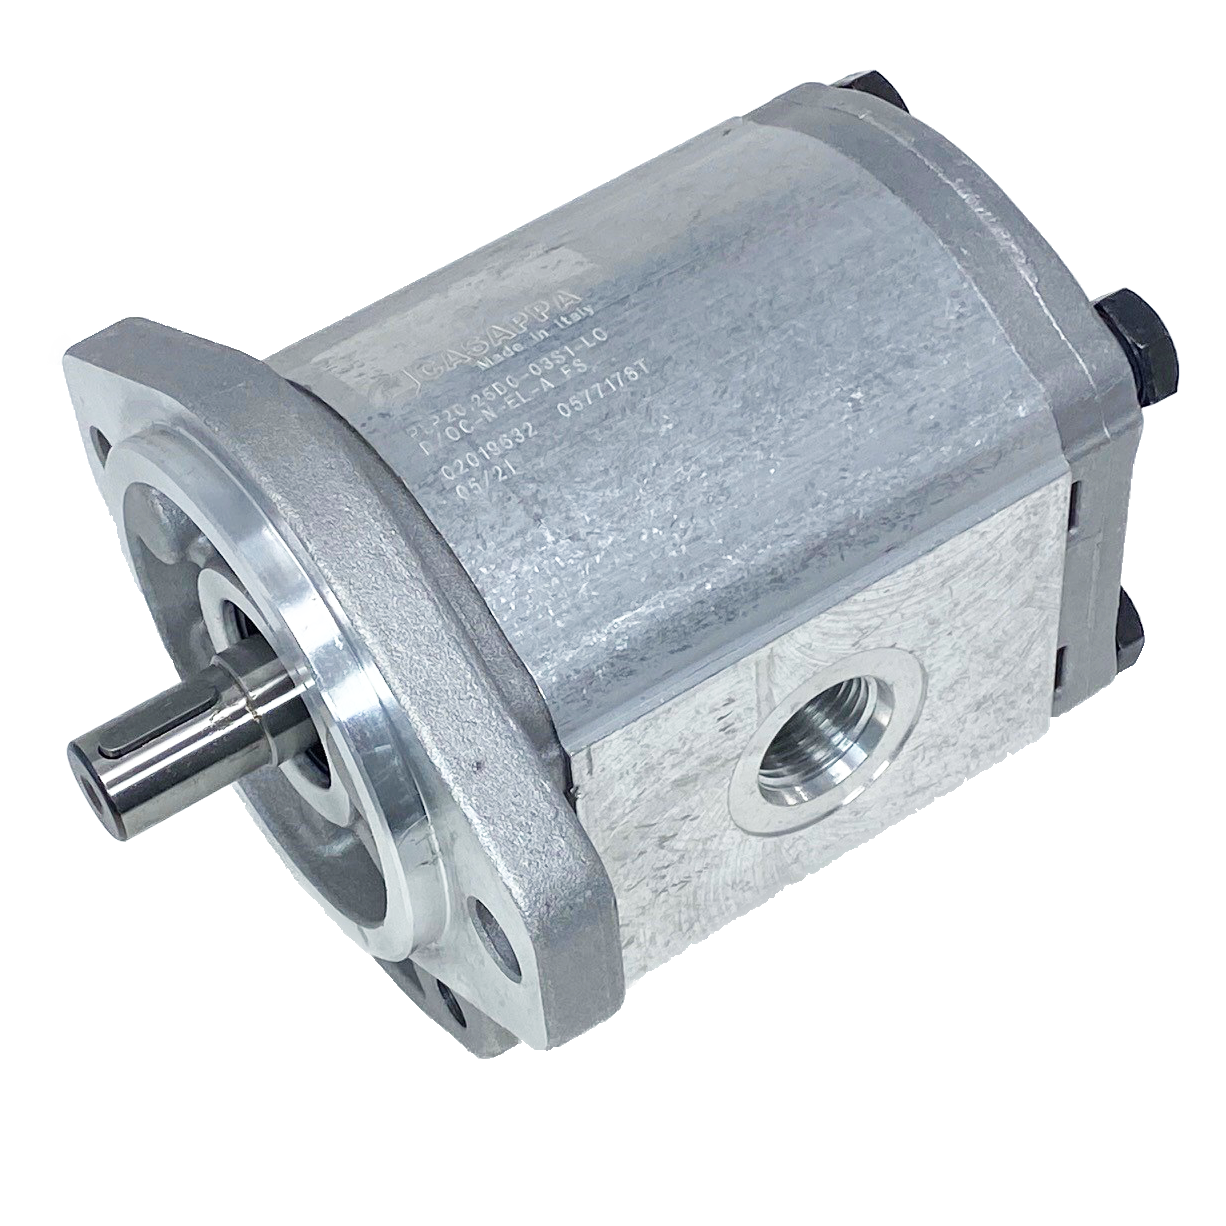 PHM20.31,5B0-31S9-LOC/OG-N-EL : Casappa Polaris Gear Motor, 33.03cc, 2900psi Rated, 2500RPM, Reversible Interior Drain, 5/8" Bore x 5/32" Key Shaft, SAE A 2-Bolt Flange, 0.625 (5/8") #10 SAE Inlet, 1.25" #20 SAE Outlet, Cast Iron Body, Aluminum Flange